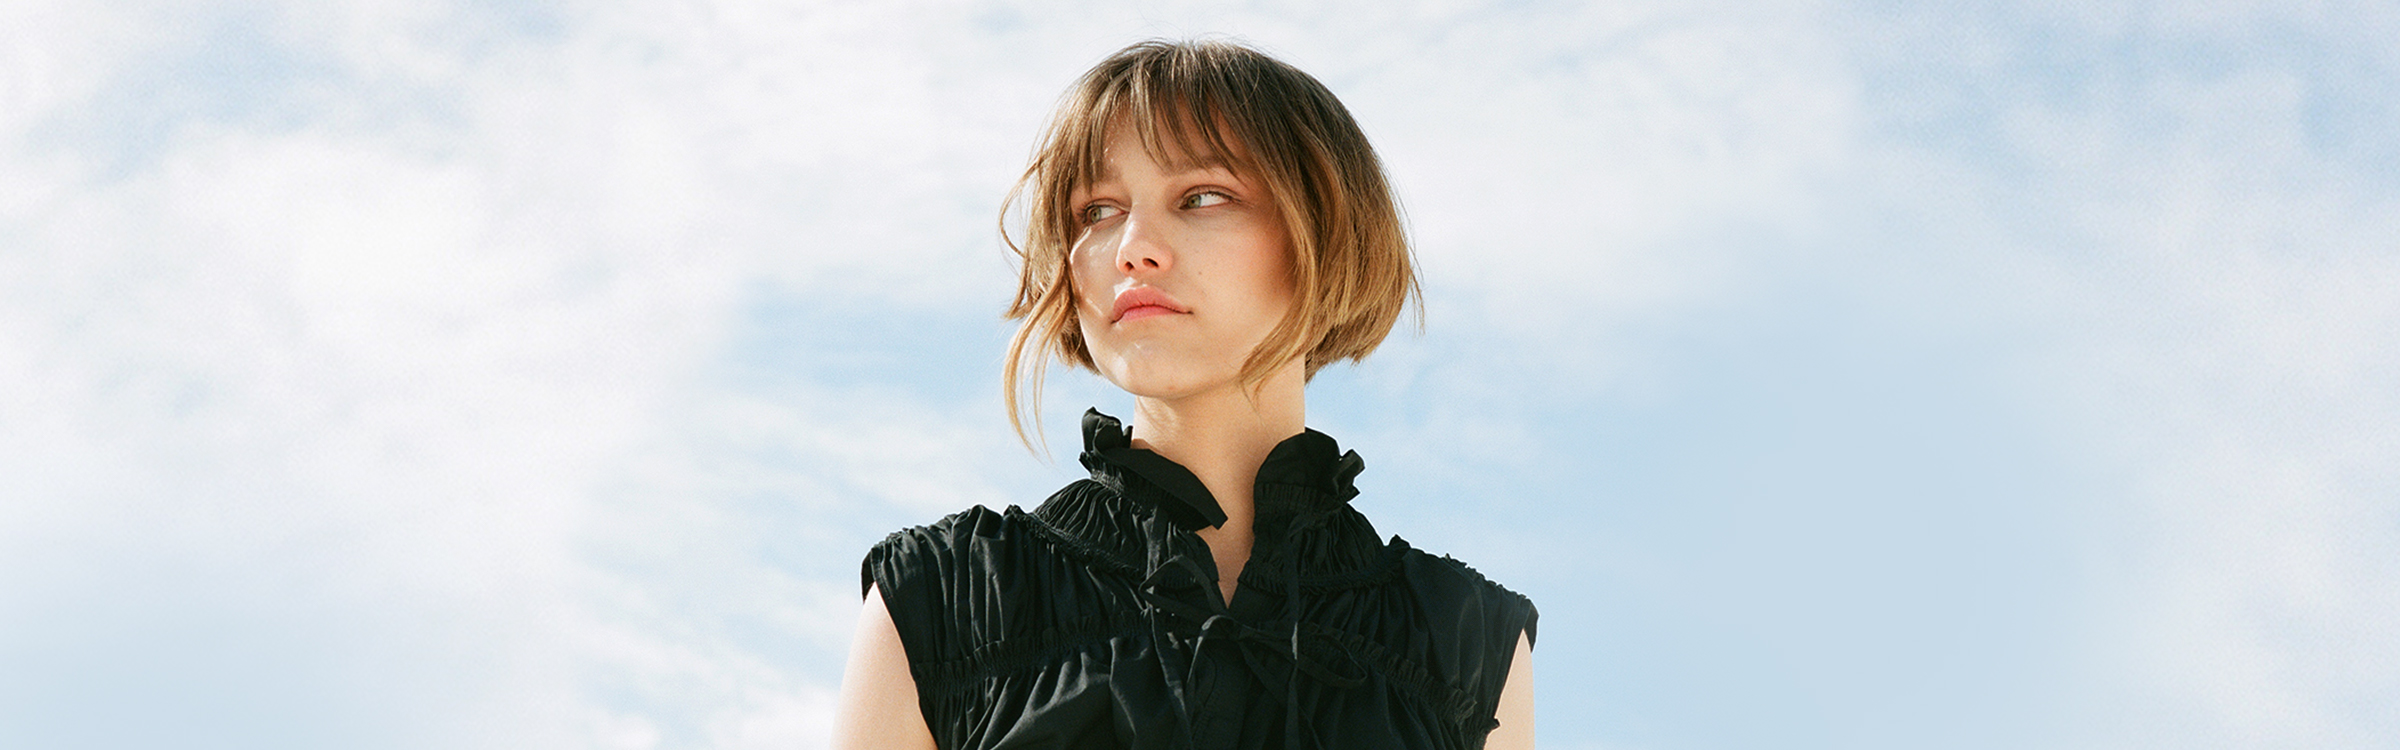 15-Year-Old Pop Star Grace VanderWaal Is Becoming a Style Icon Before Our Eyes